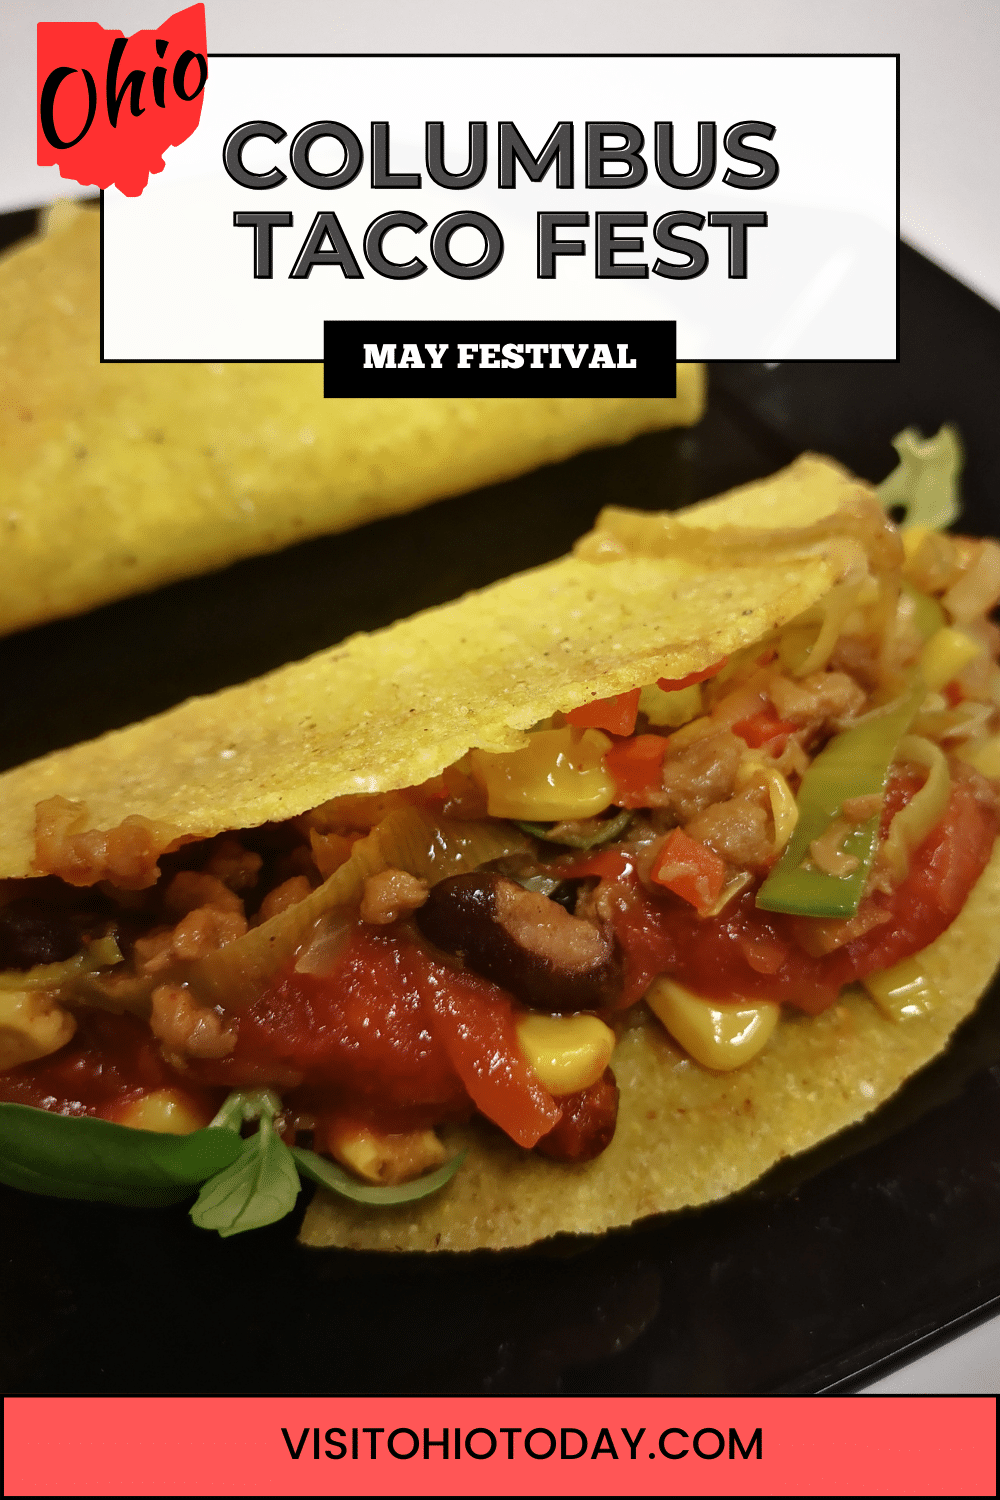 Columbus Taco Fest is an annual festival celebrating the taco that takes place in Genoa Park in Columbus in mid-May.